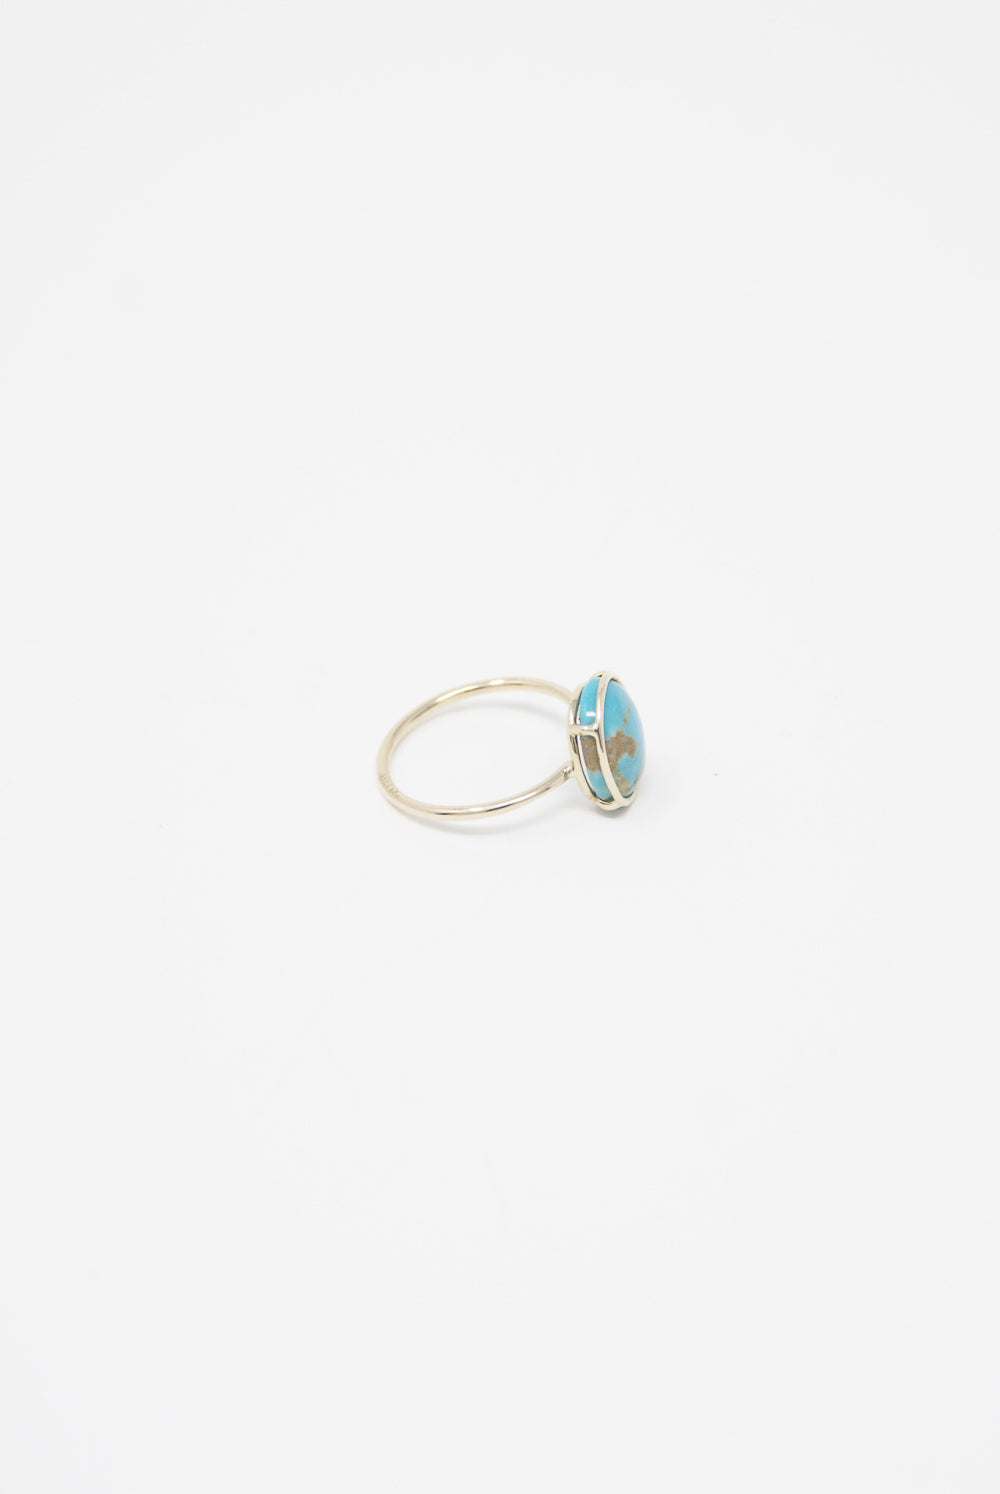 Mary MacGill - 14K Floating Ring in Turquoise size 7.25 side view